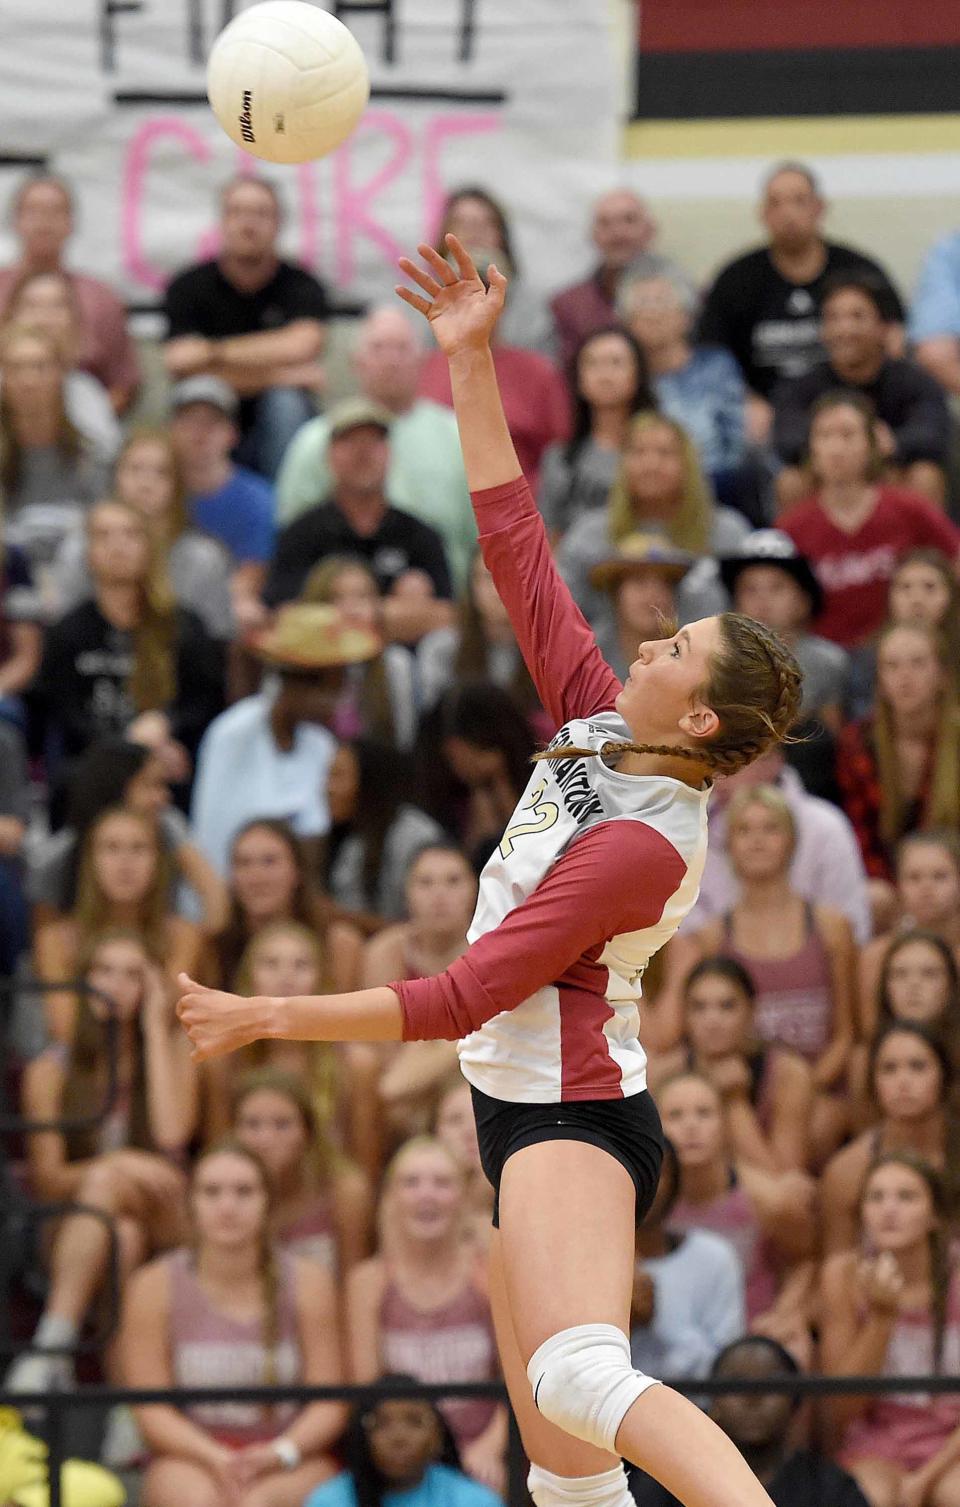 Germantown's Diana Wells (22) spikes the ball against Madison Central in the MHSAA Class 6A volleyball playoffs at Germantown High School in Gluckstadt, Miss., on Monday, October 17, 2022.